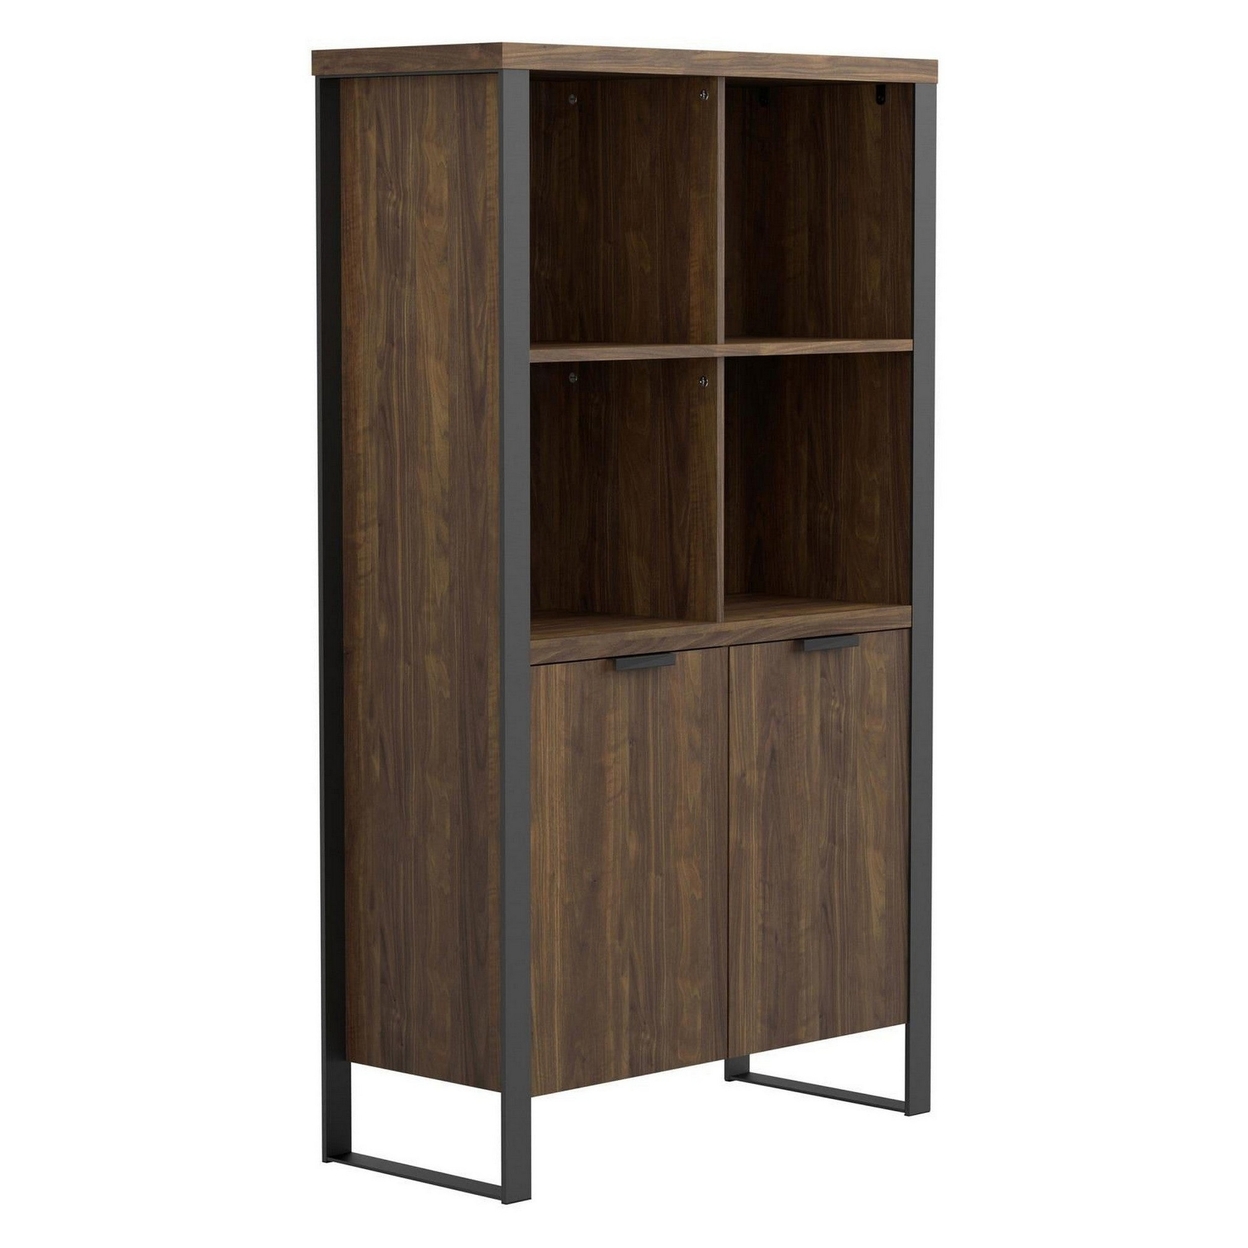 Wooden Bookcase With 2 Doors And Metal Frame, Brown And Black- Saltoro Sherpi